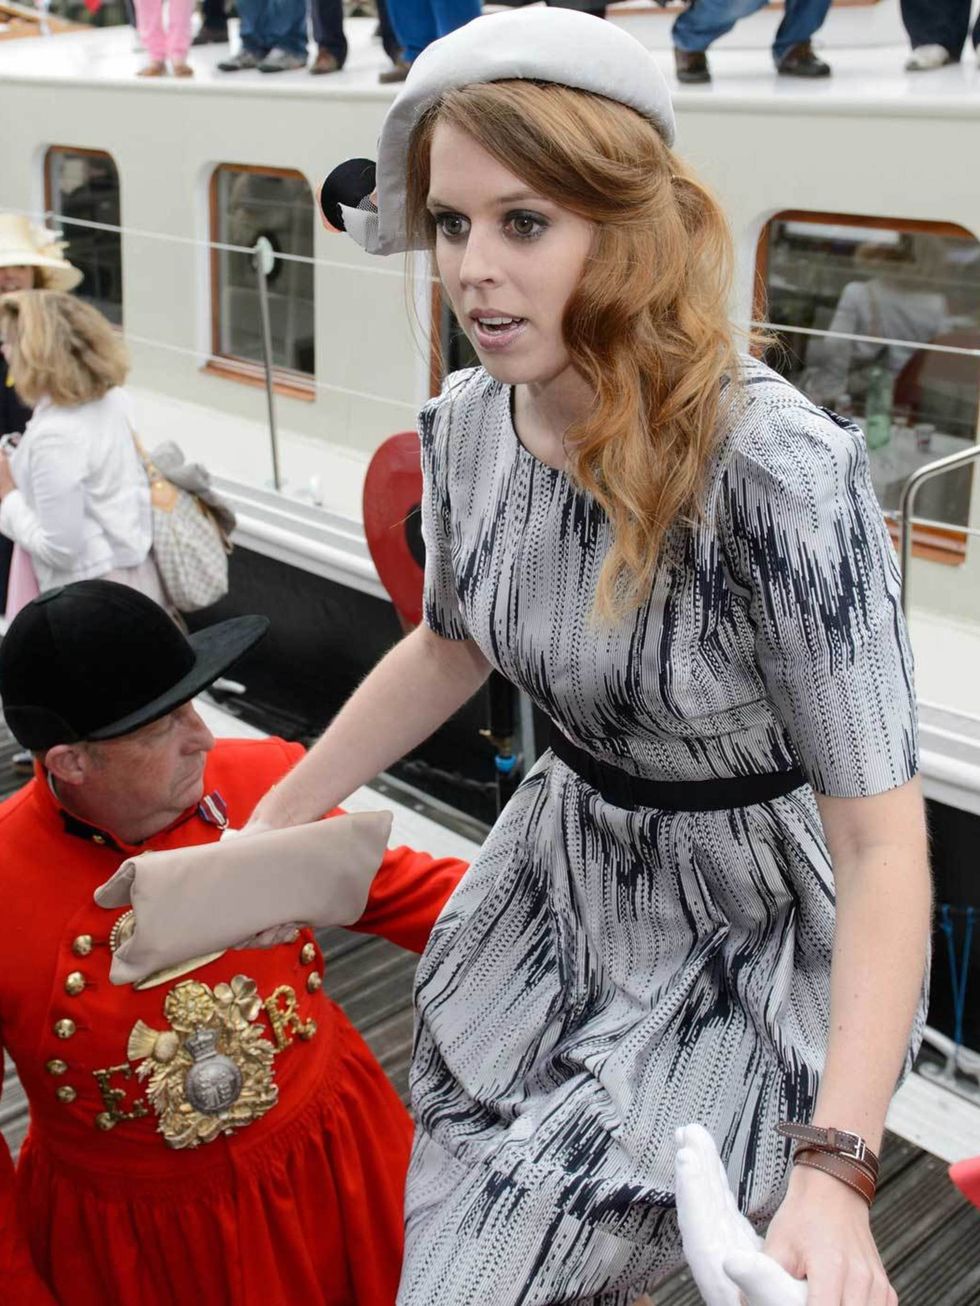 <p>Princess Beatrice in a Suzannah dress, <a href="http://www.elleuk.com/catwalk/designer-a-z/marni/autumn-winter-2012">Marni</a> coat and Stephen Jones hat on the Royal Jubilee flotilla during The Queen's Diamond Jubilee celebrations</p>